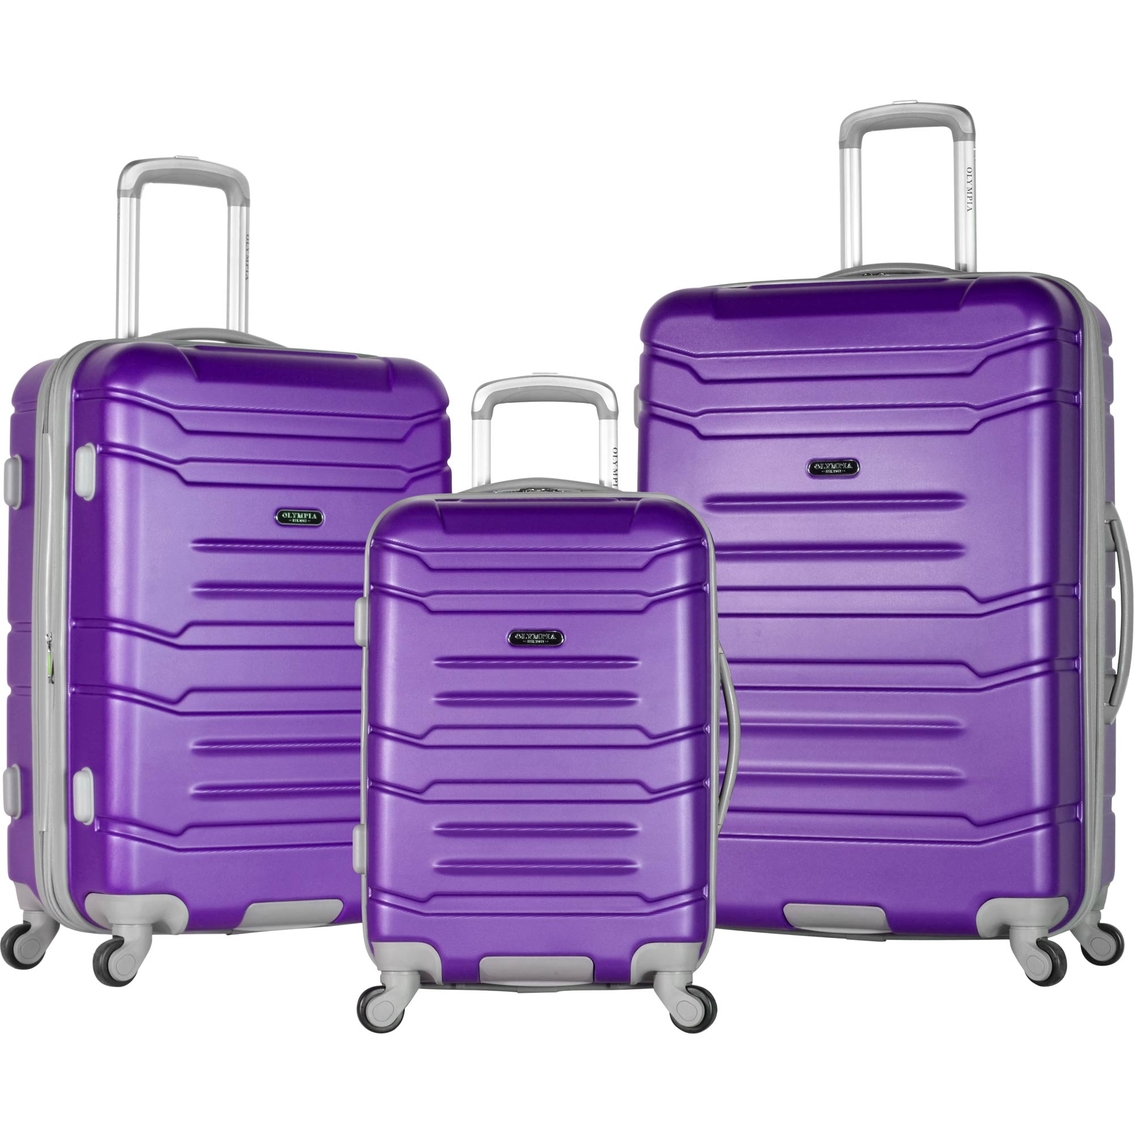 Olympia Luggage Denmark 3 Pc. Set | Luggage | Clothing & Accessories ...